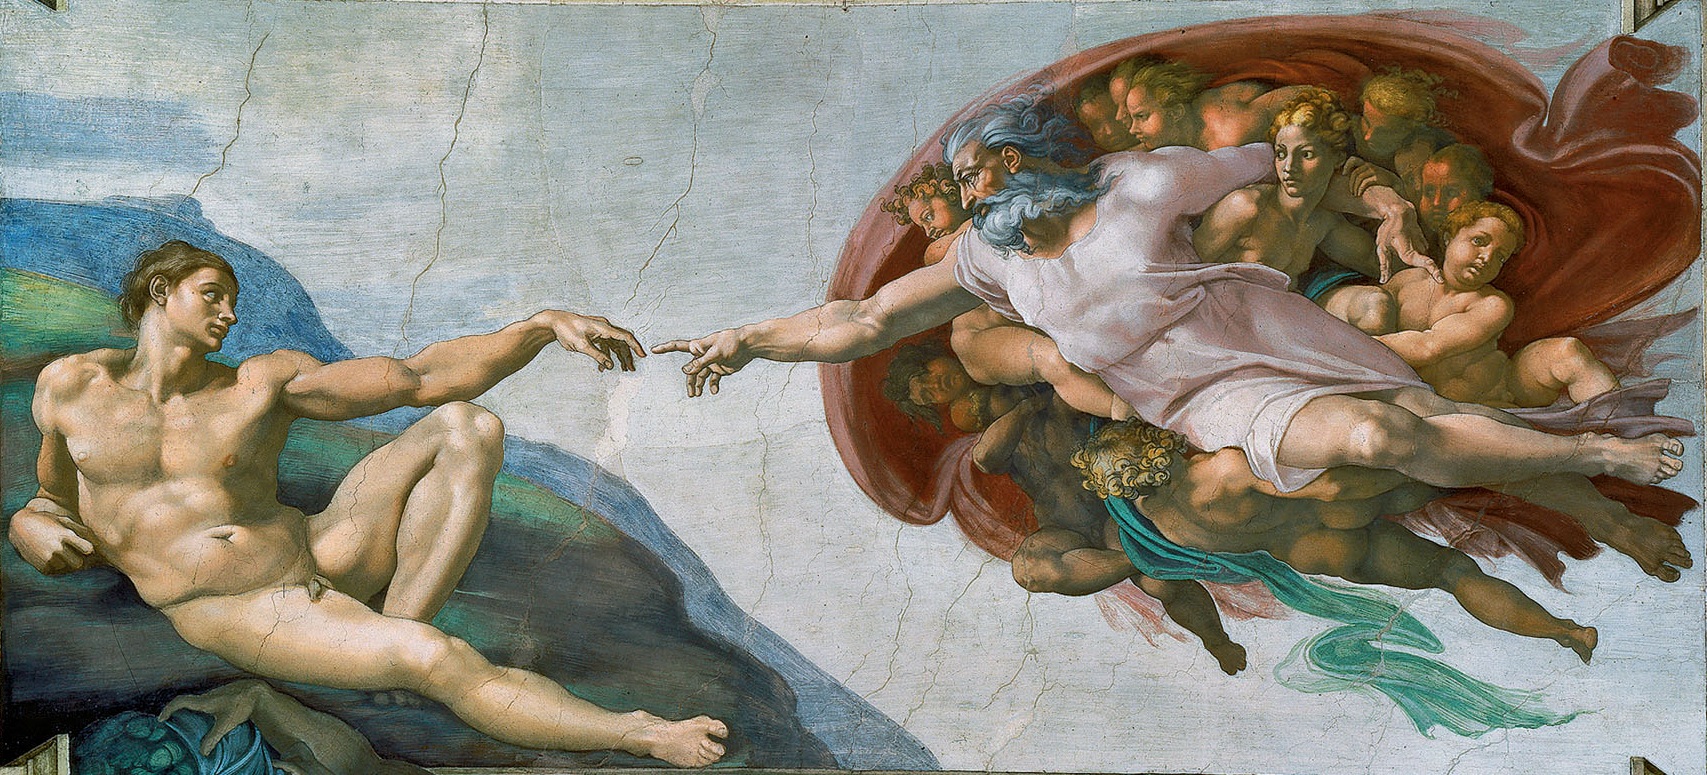 The Creation of Adam by Michelangelo, public domain